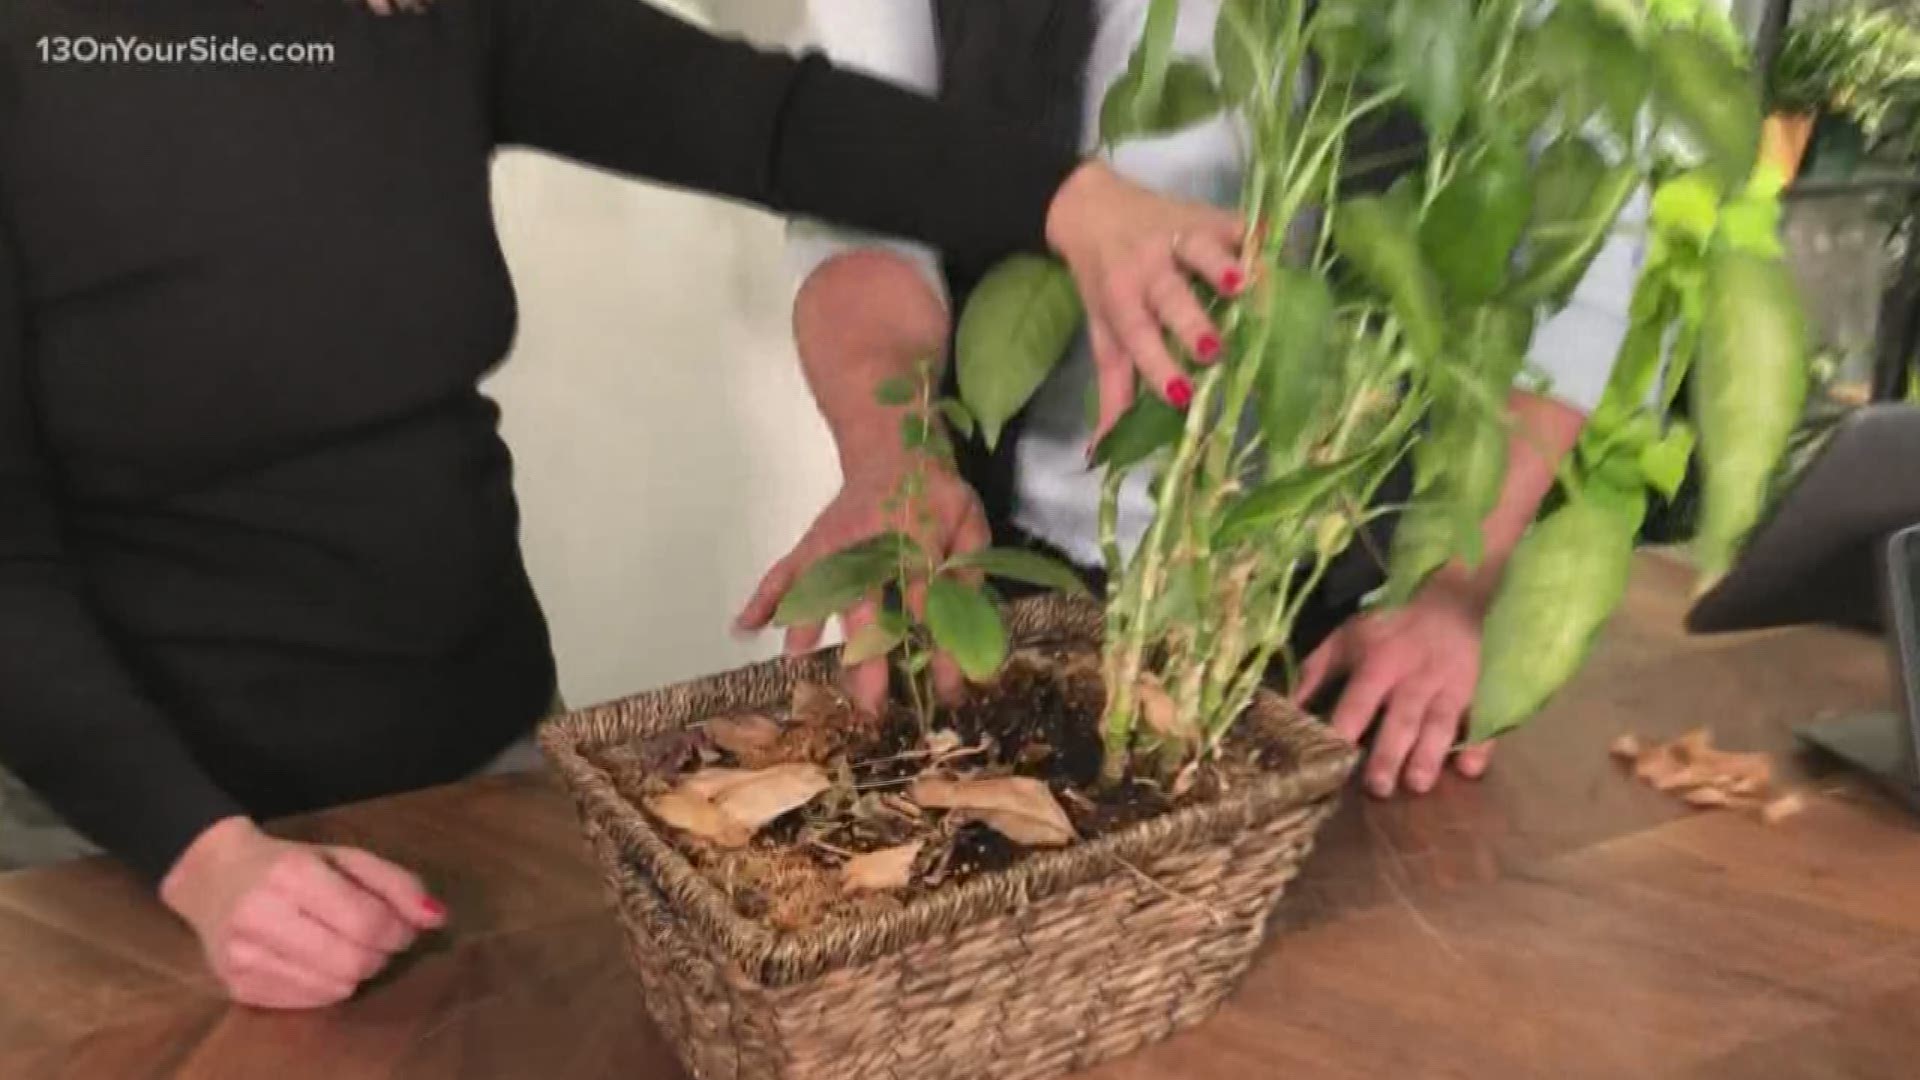 Expert tips on how to divide up your plant gift basket and ensure the plants survive.